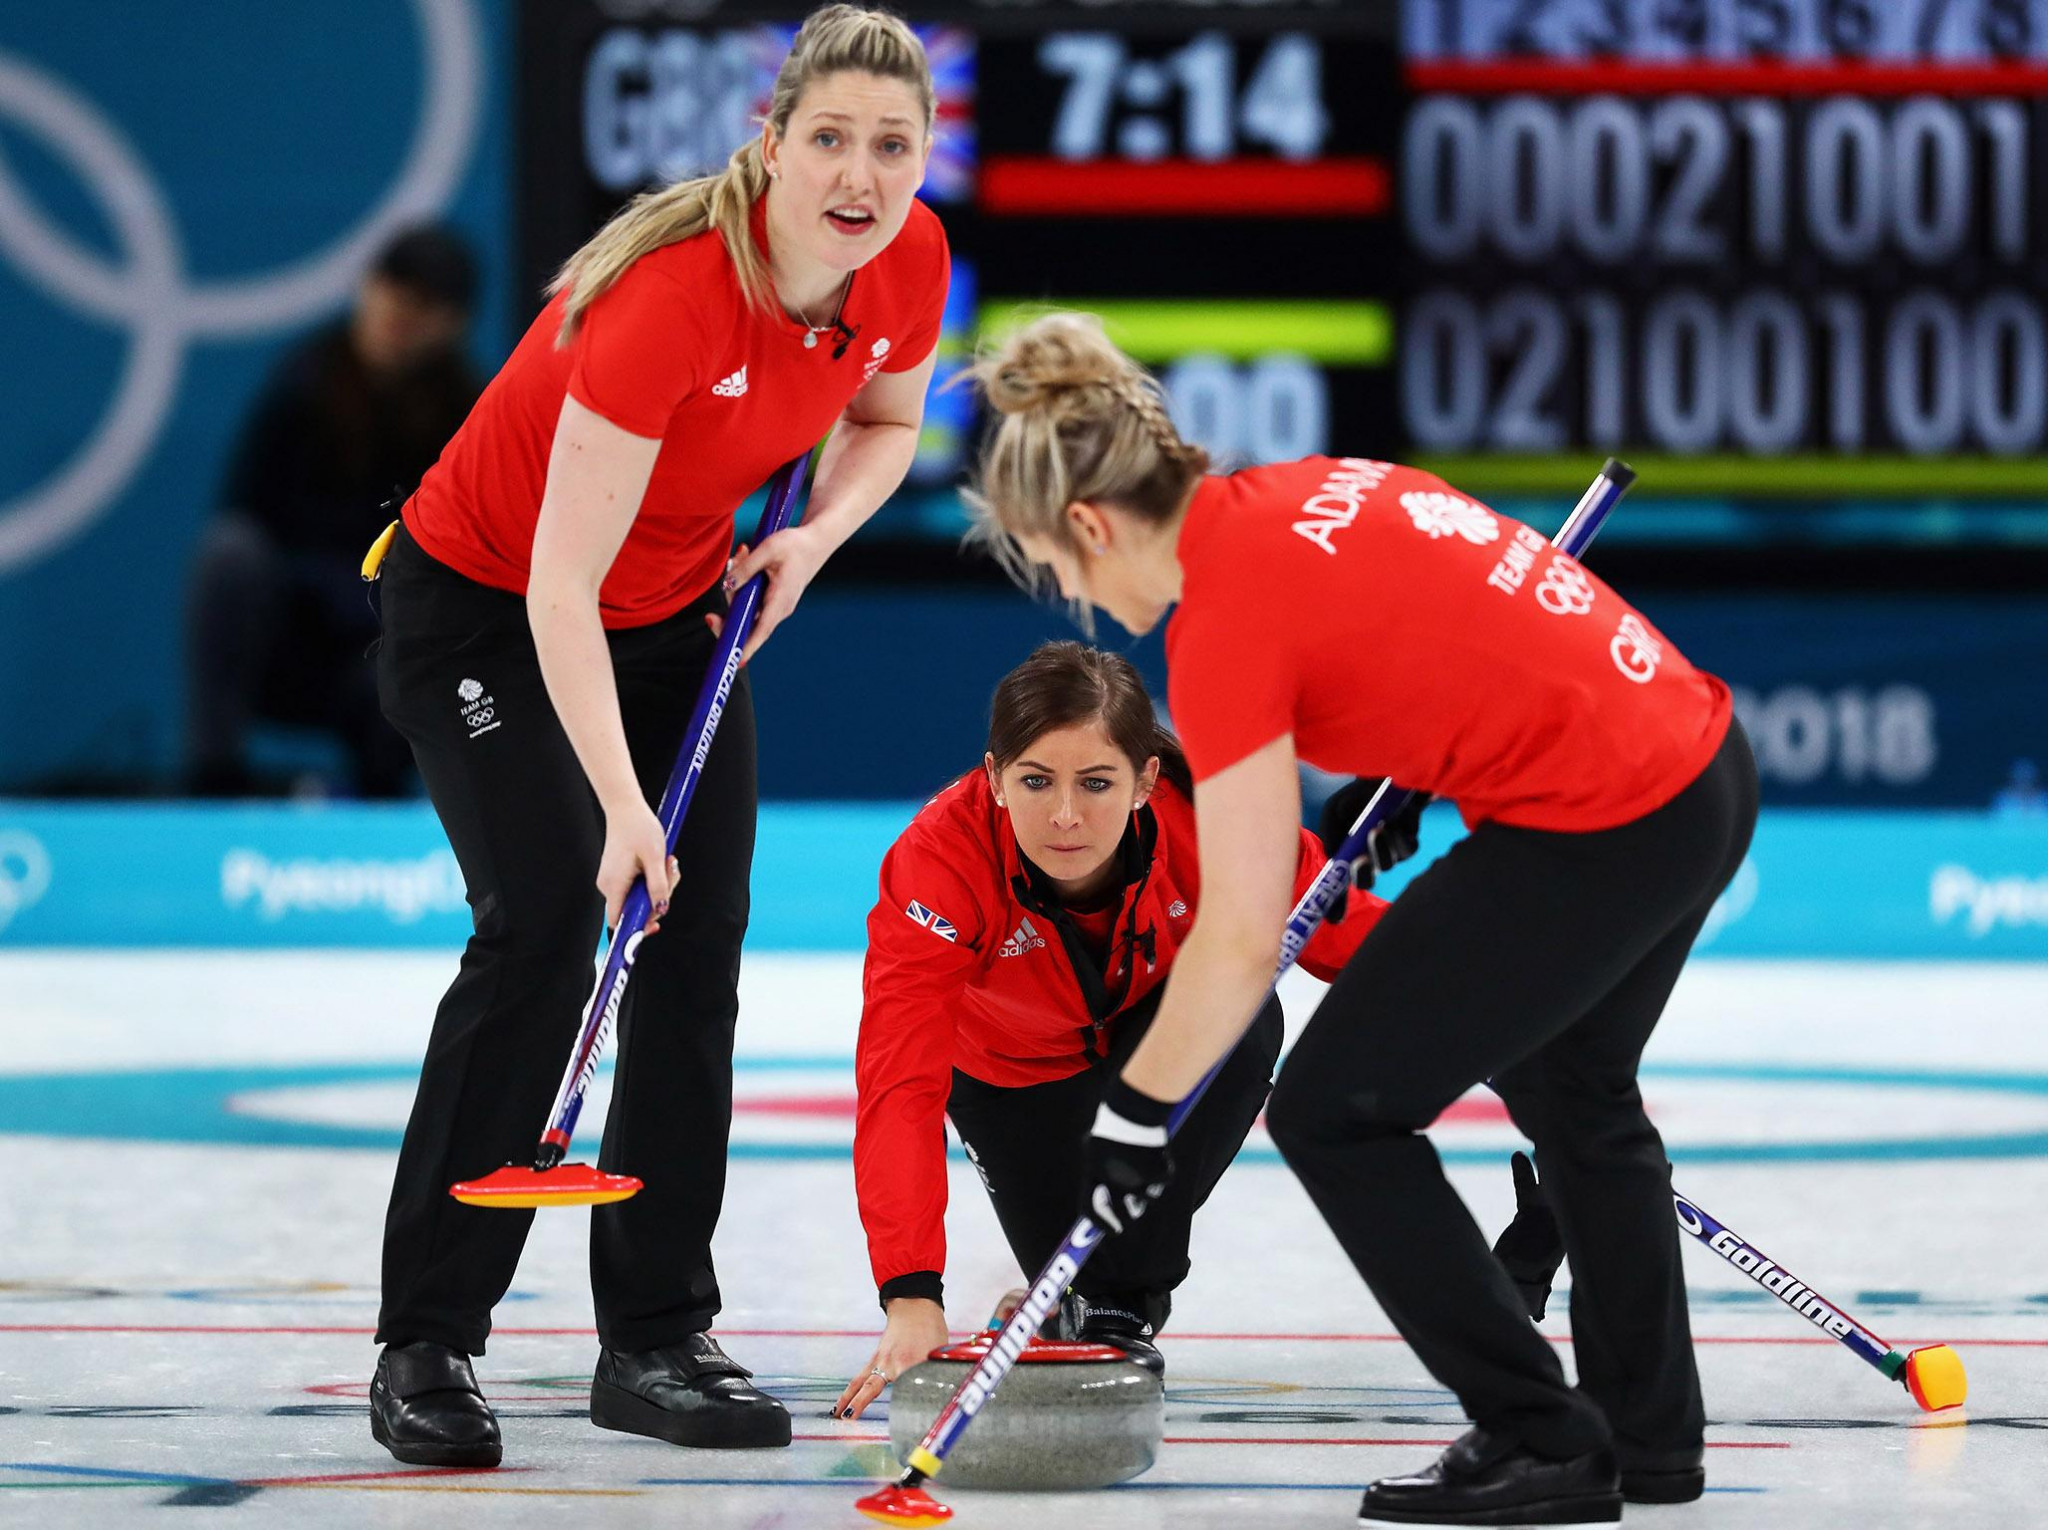 Some of Eve Muirhead's team's players, including Lauren Gray - left - and Vicki Chalmers - right - have attended the youth camp over the years ©Getty Images